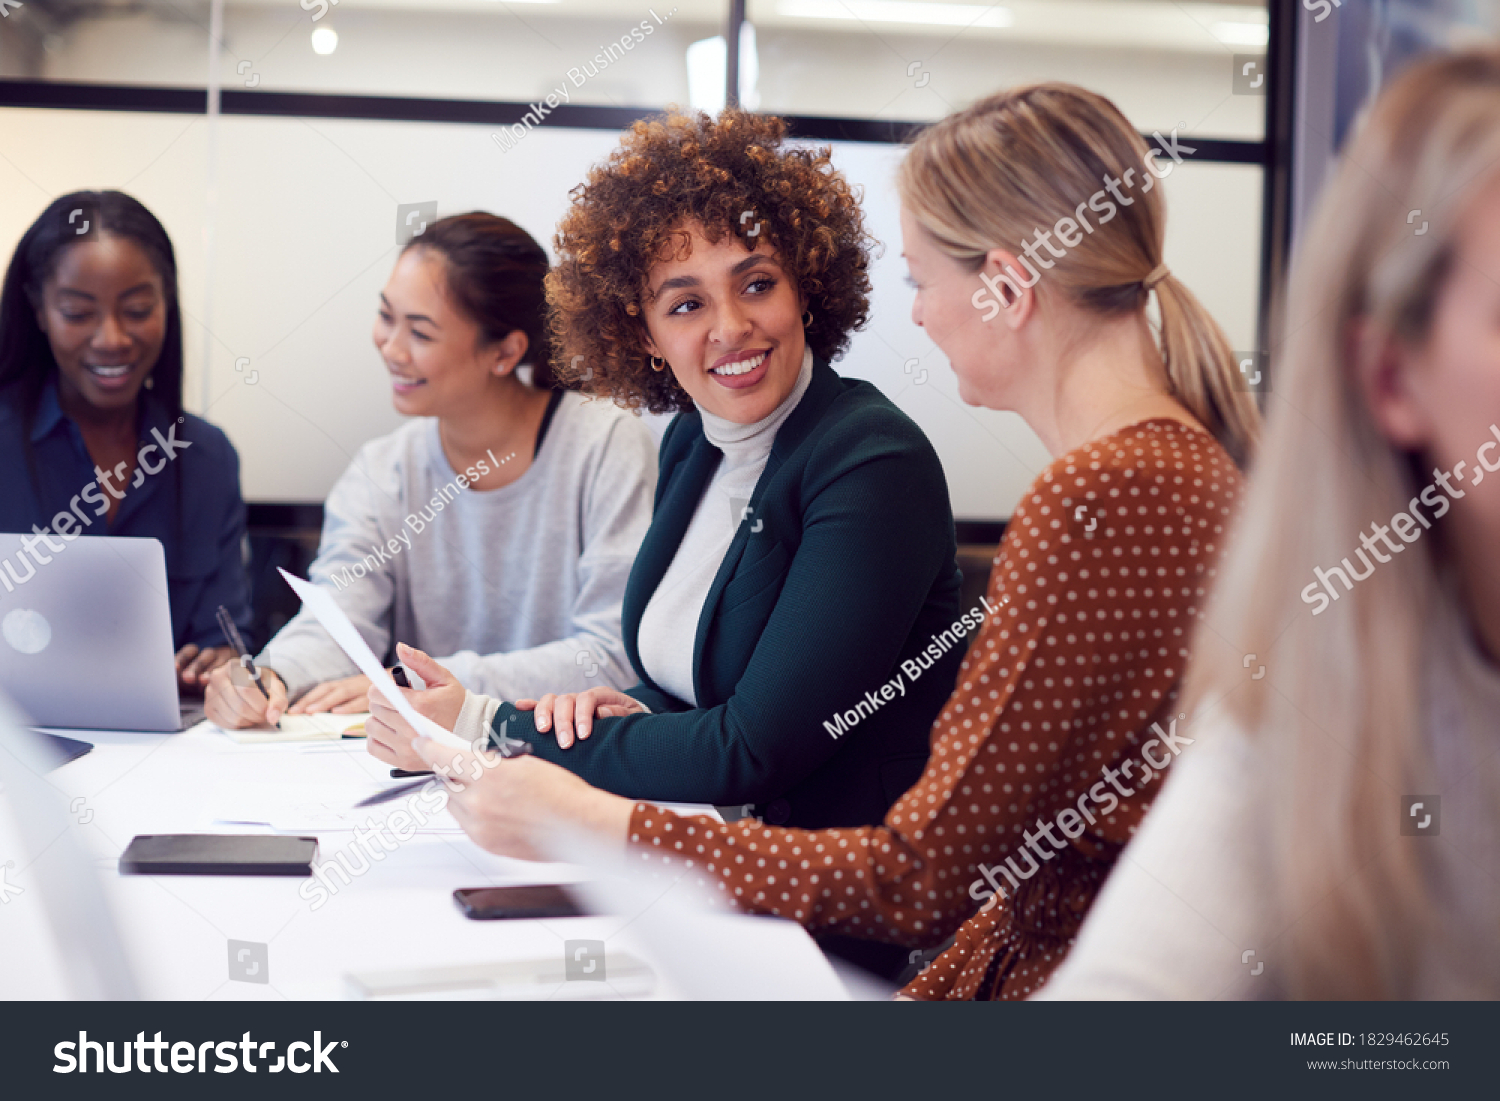 Group Of Businesswomen Collaborating In Creative Meeting Around Table In Modern Office #1829462645